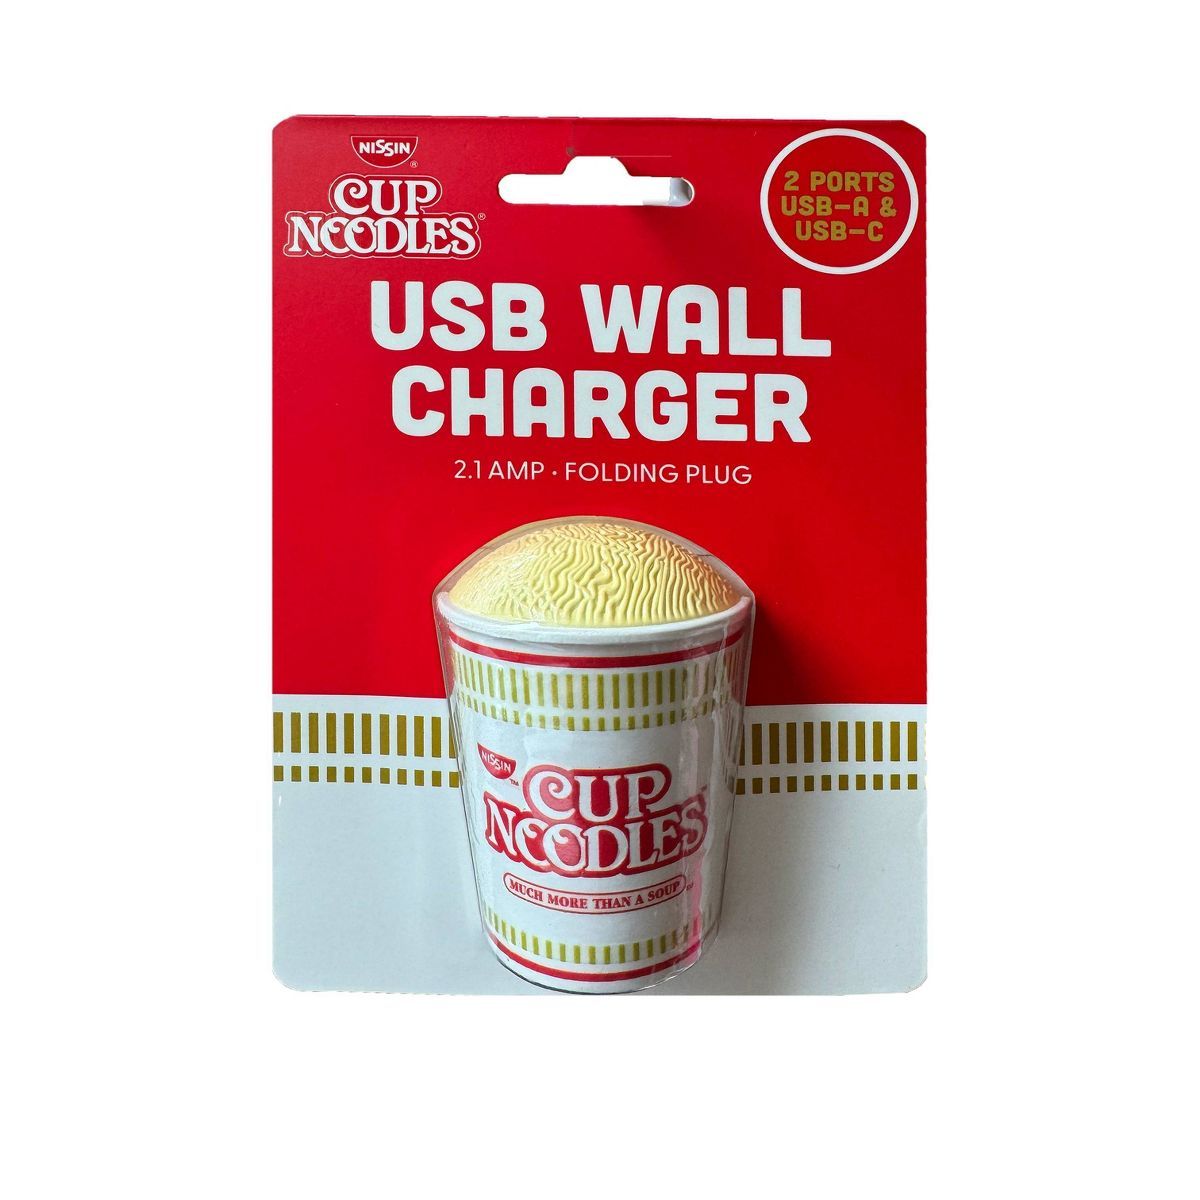 USB Wall Chargers Noodles | Target